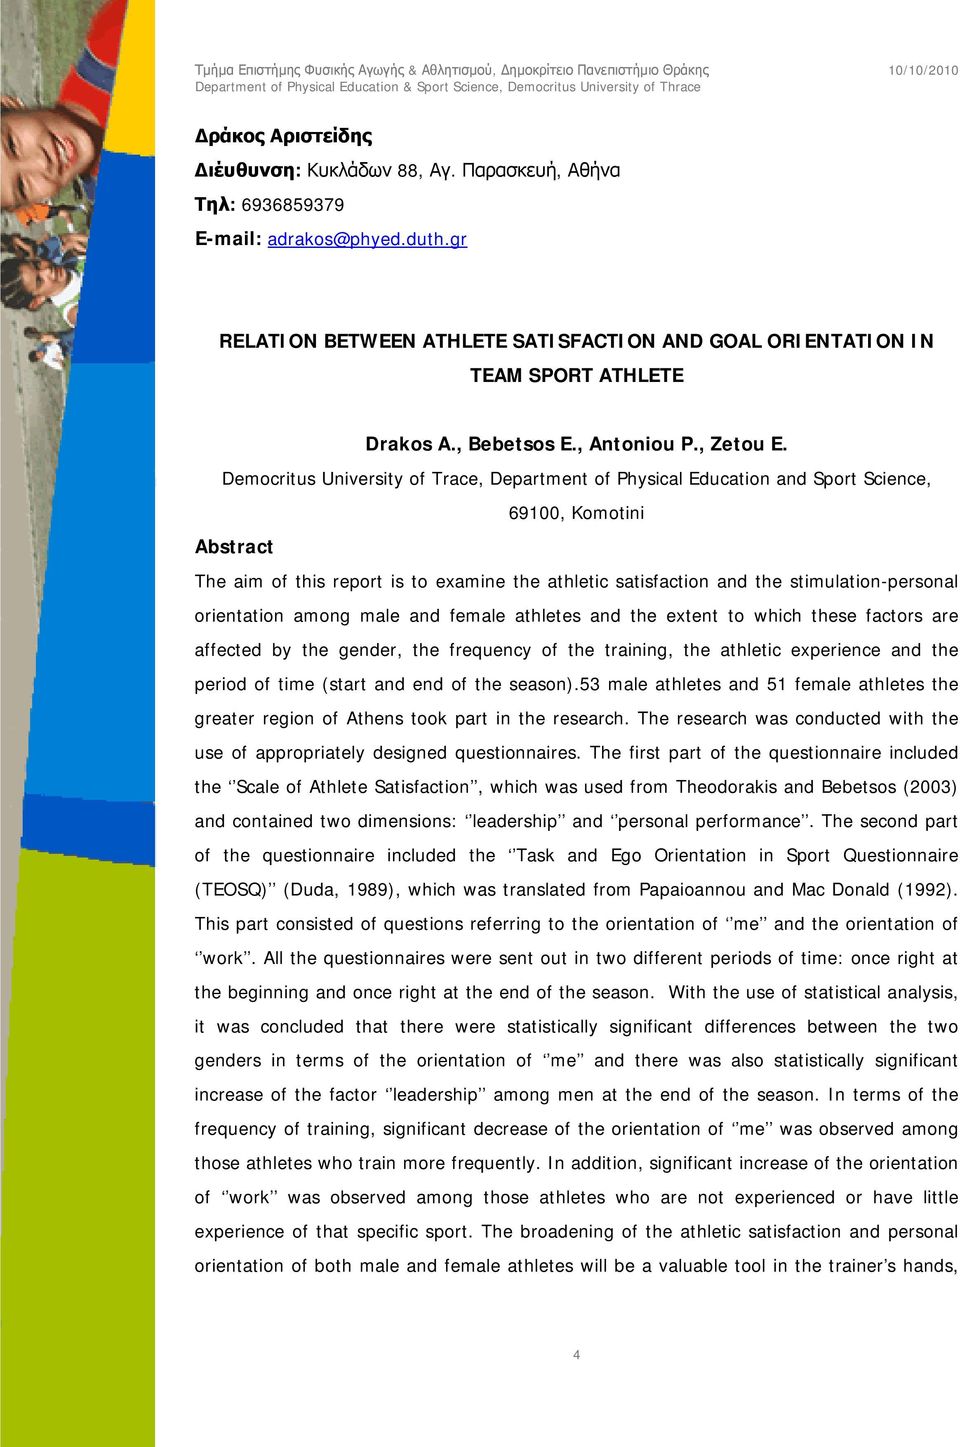 Democritus University of Trace, Department of Physical Education and Sport Science, 69100, Komotini Abstract The aim of this report is to examine the athletic satisfaction and the